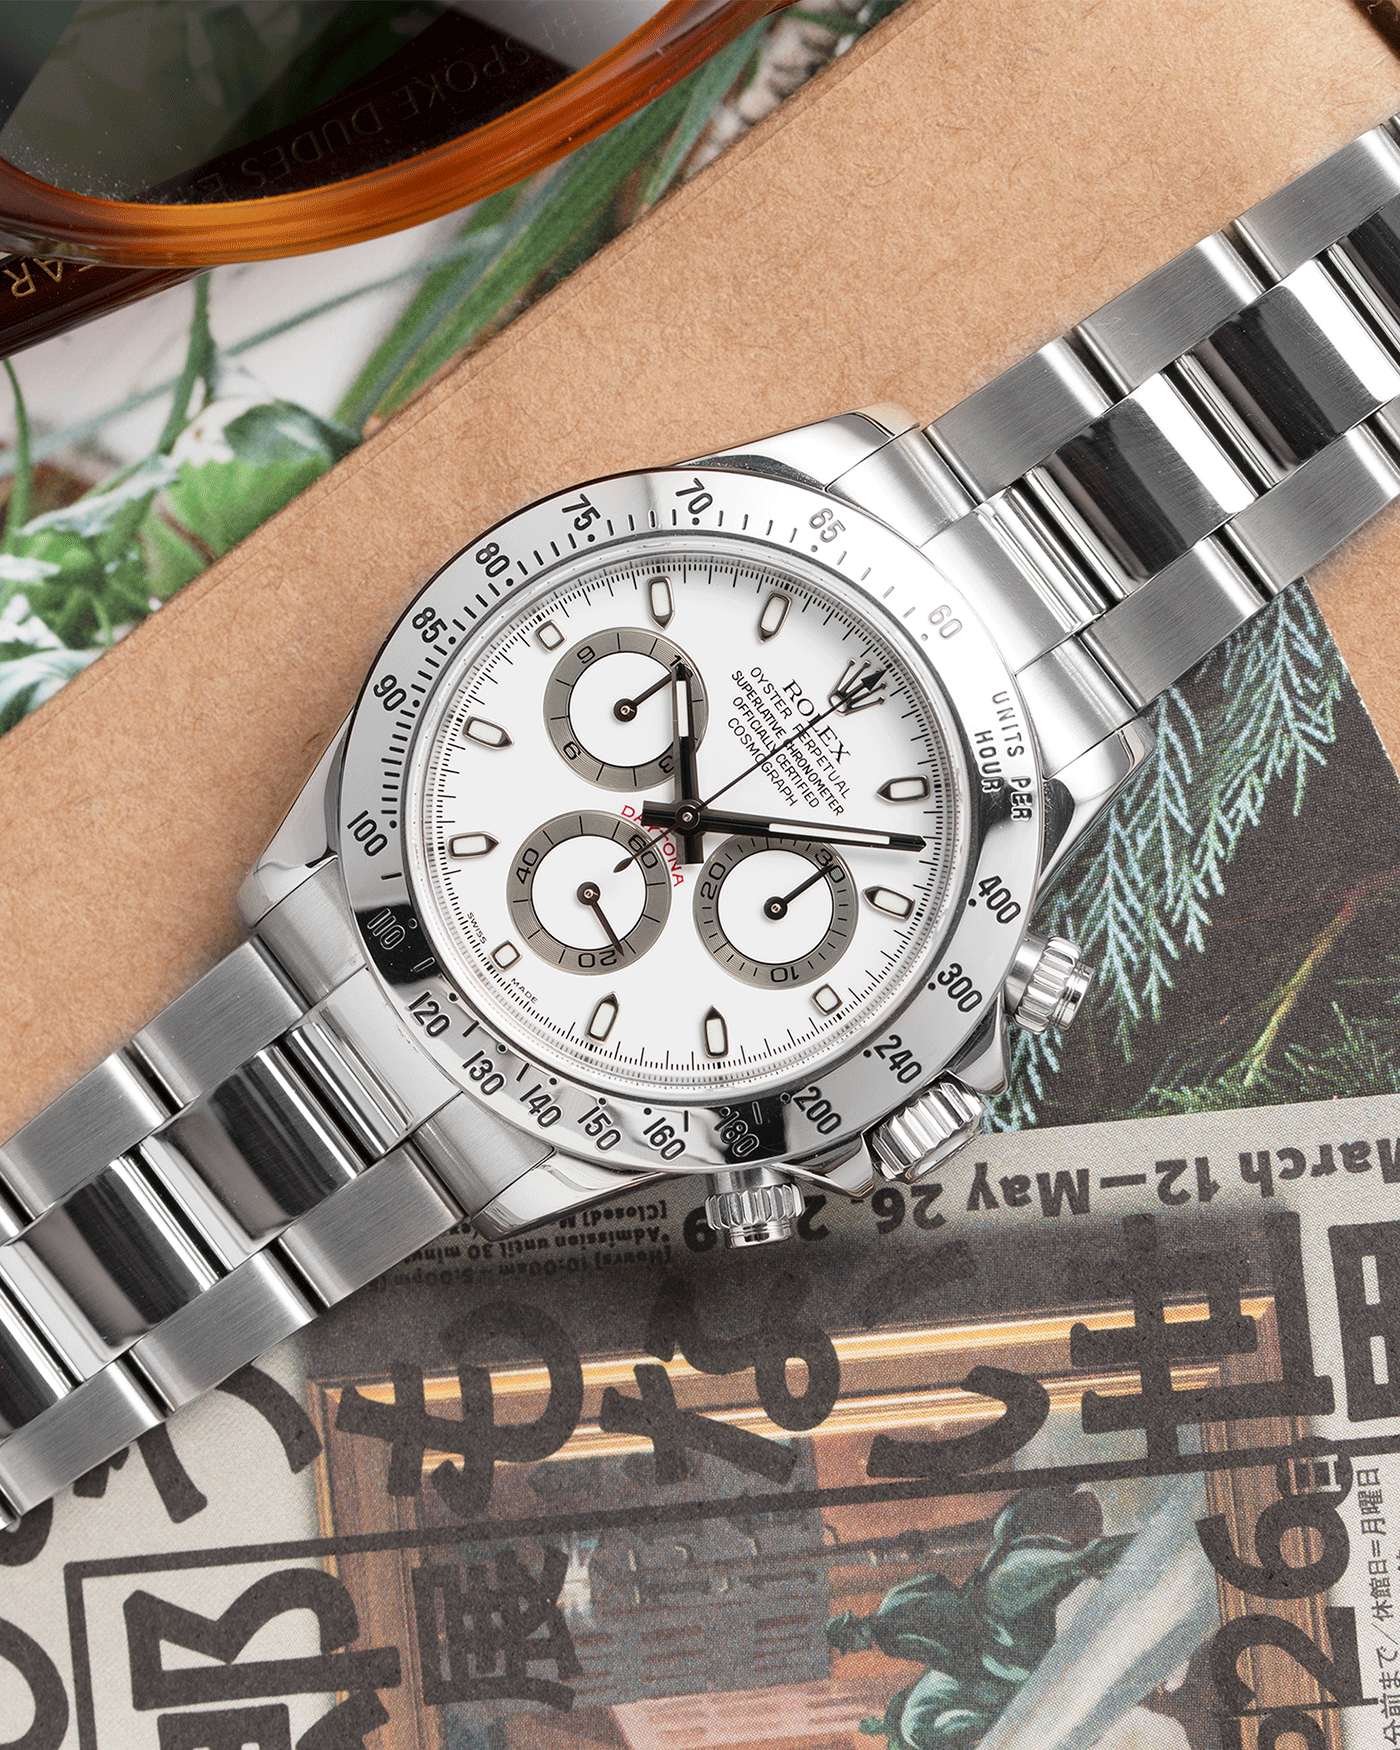 Rolex Cosmograph Daytona 116520 Chronograph Watch | S.Song Vintage Timepieces 